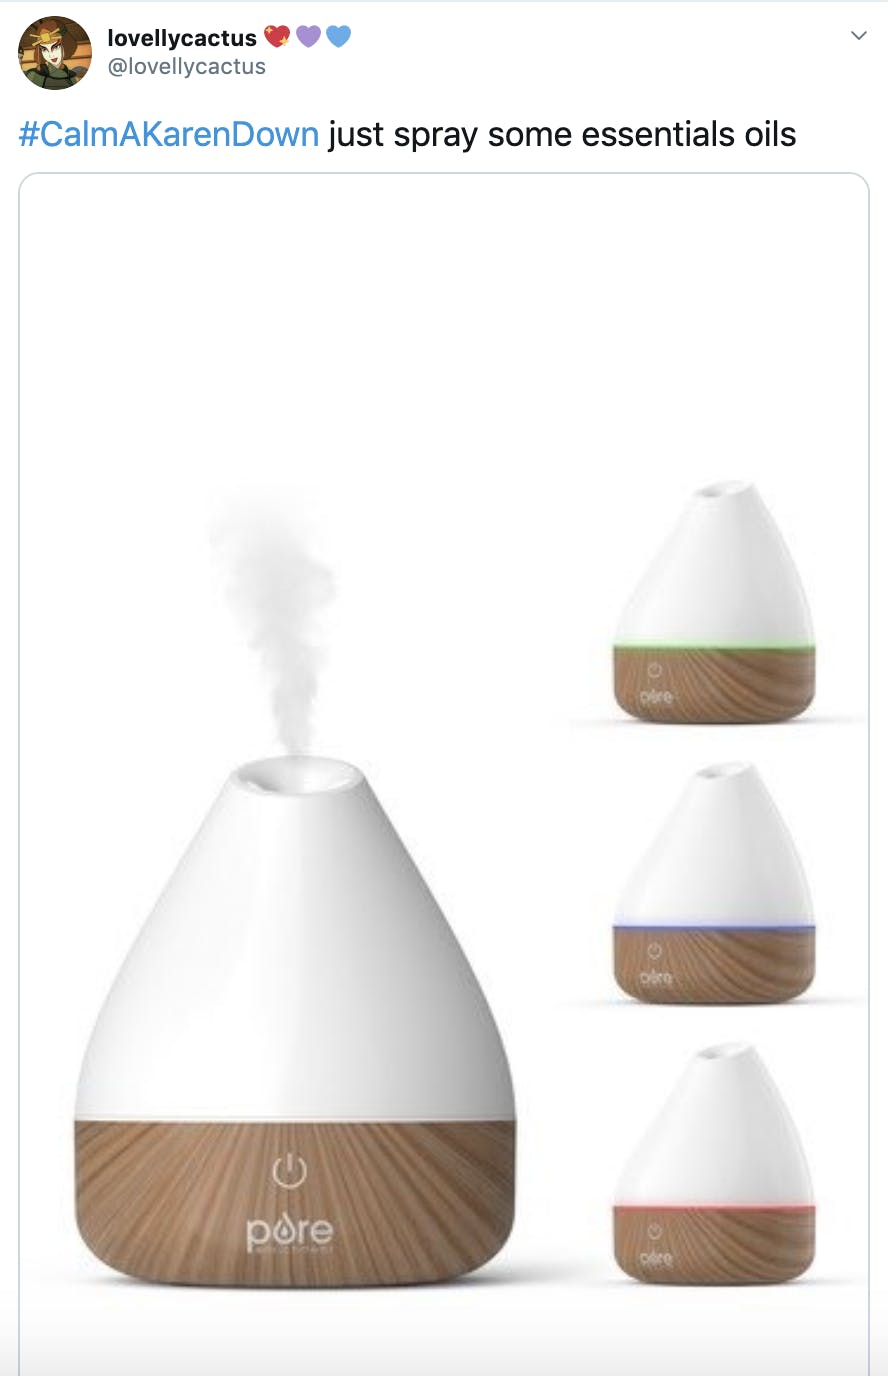 "#CalmAKarenDown just spray some essentials oils" over image of an oil diffuser